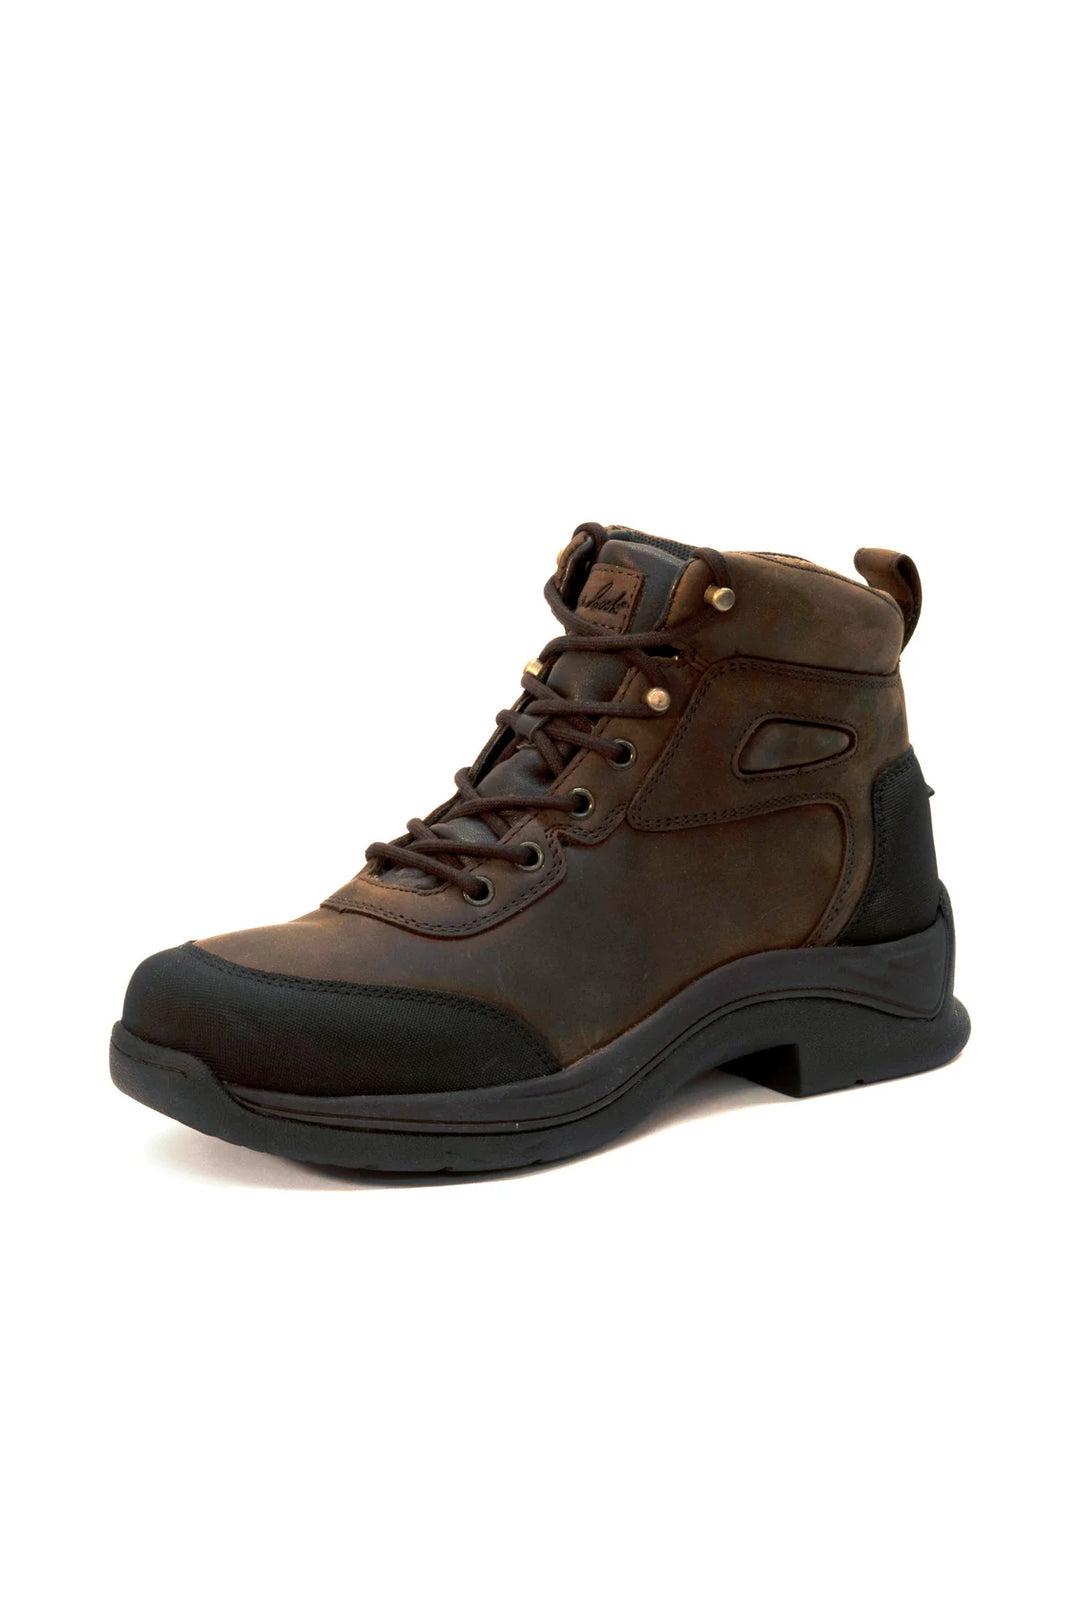 Thomas Cook - Ladies Arkaba Lace Up Boots